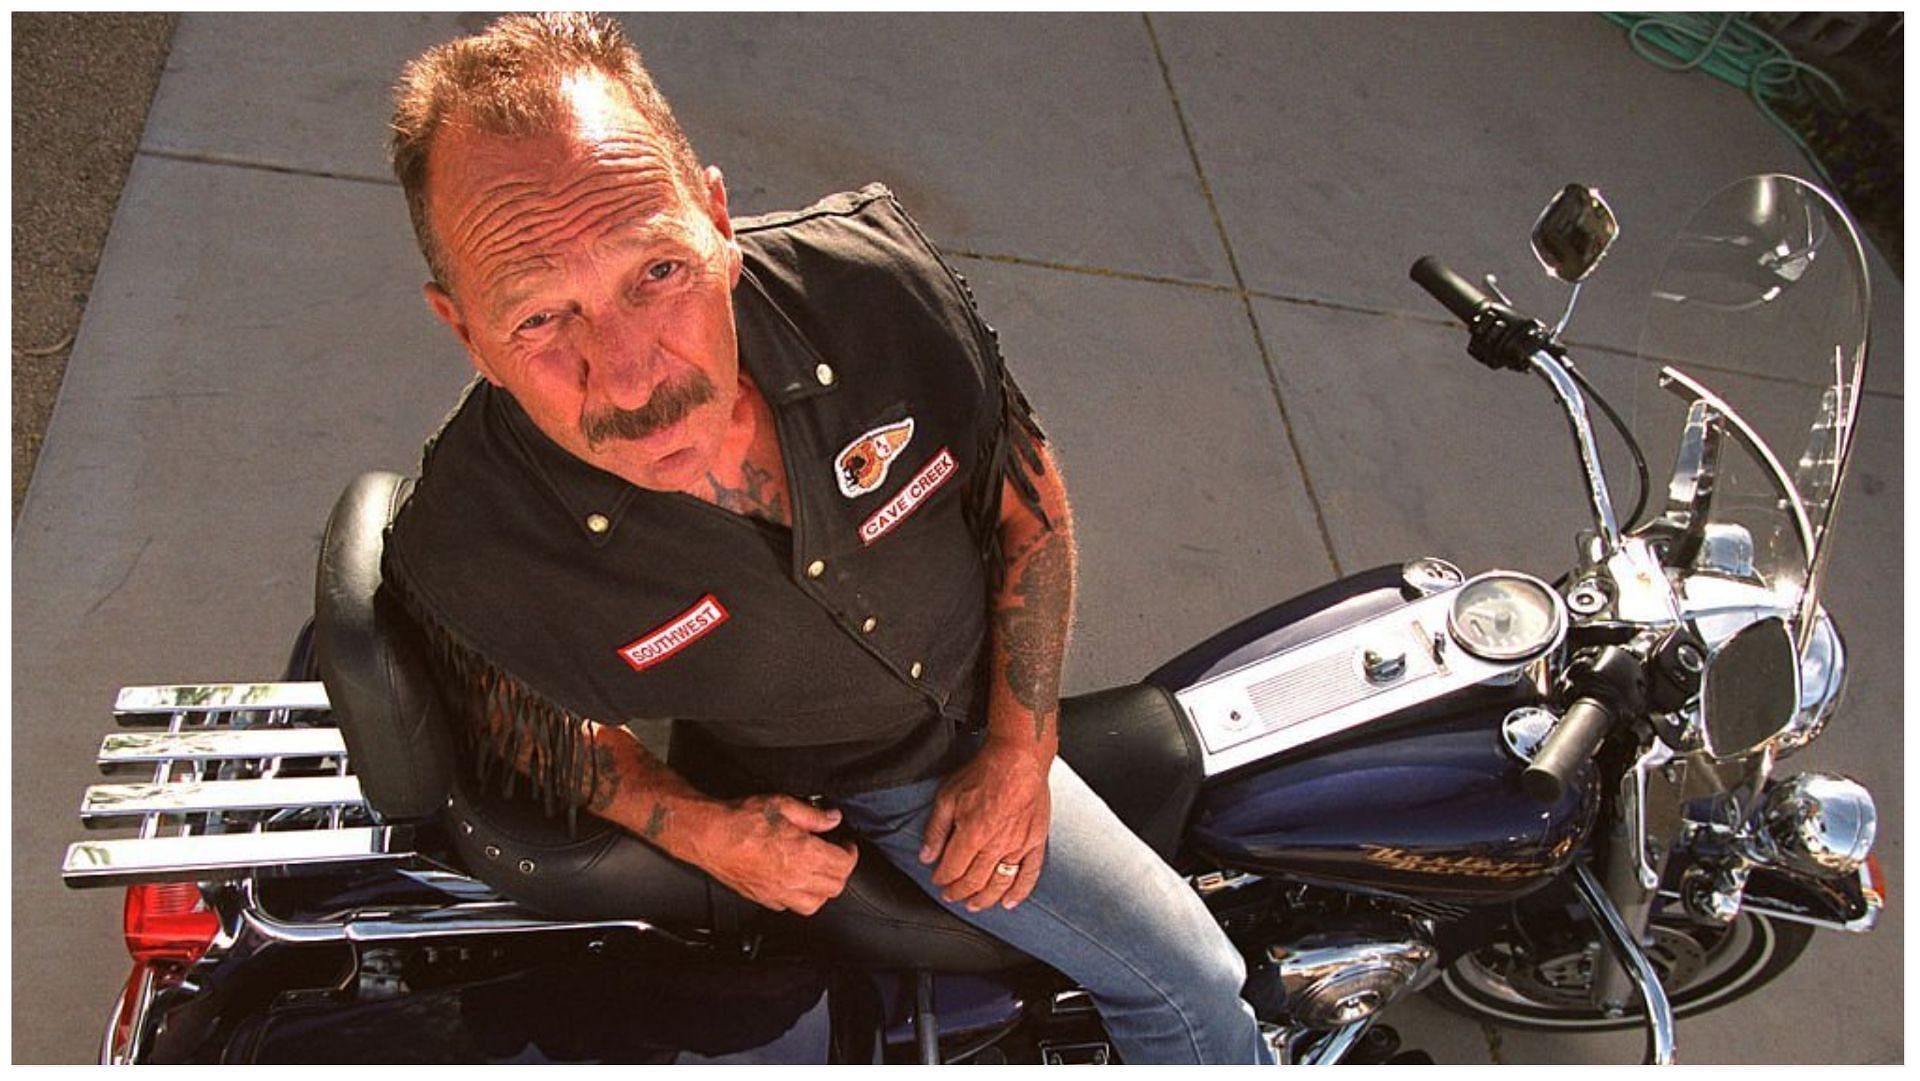 Sonny Barger was mostly known as the founding member of Hells Angels (Image via Ken Hively/Getty Images)